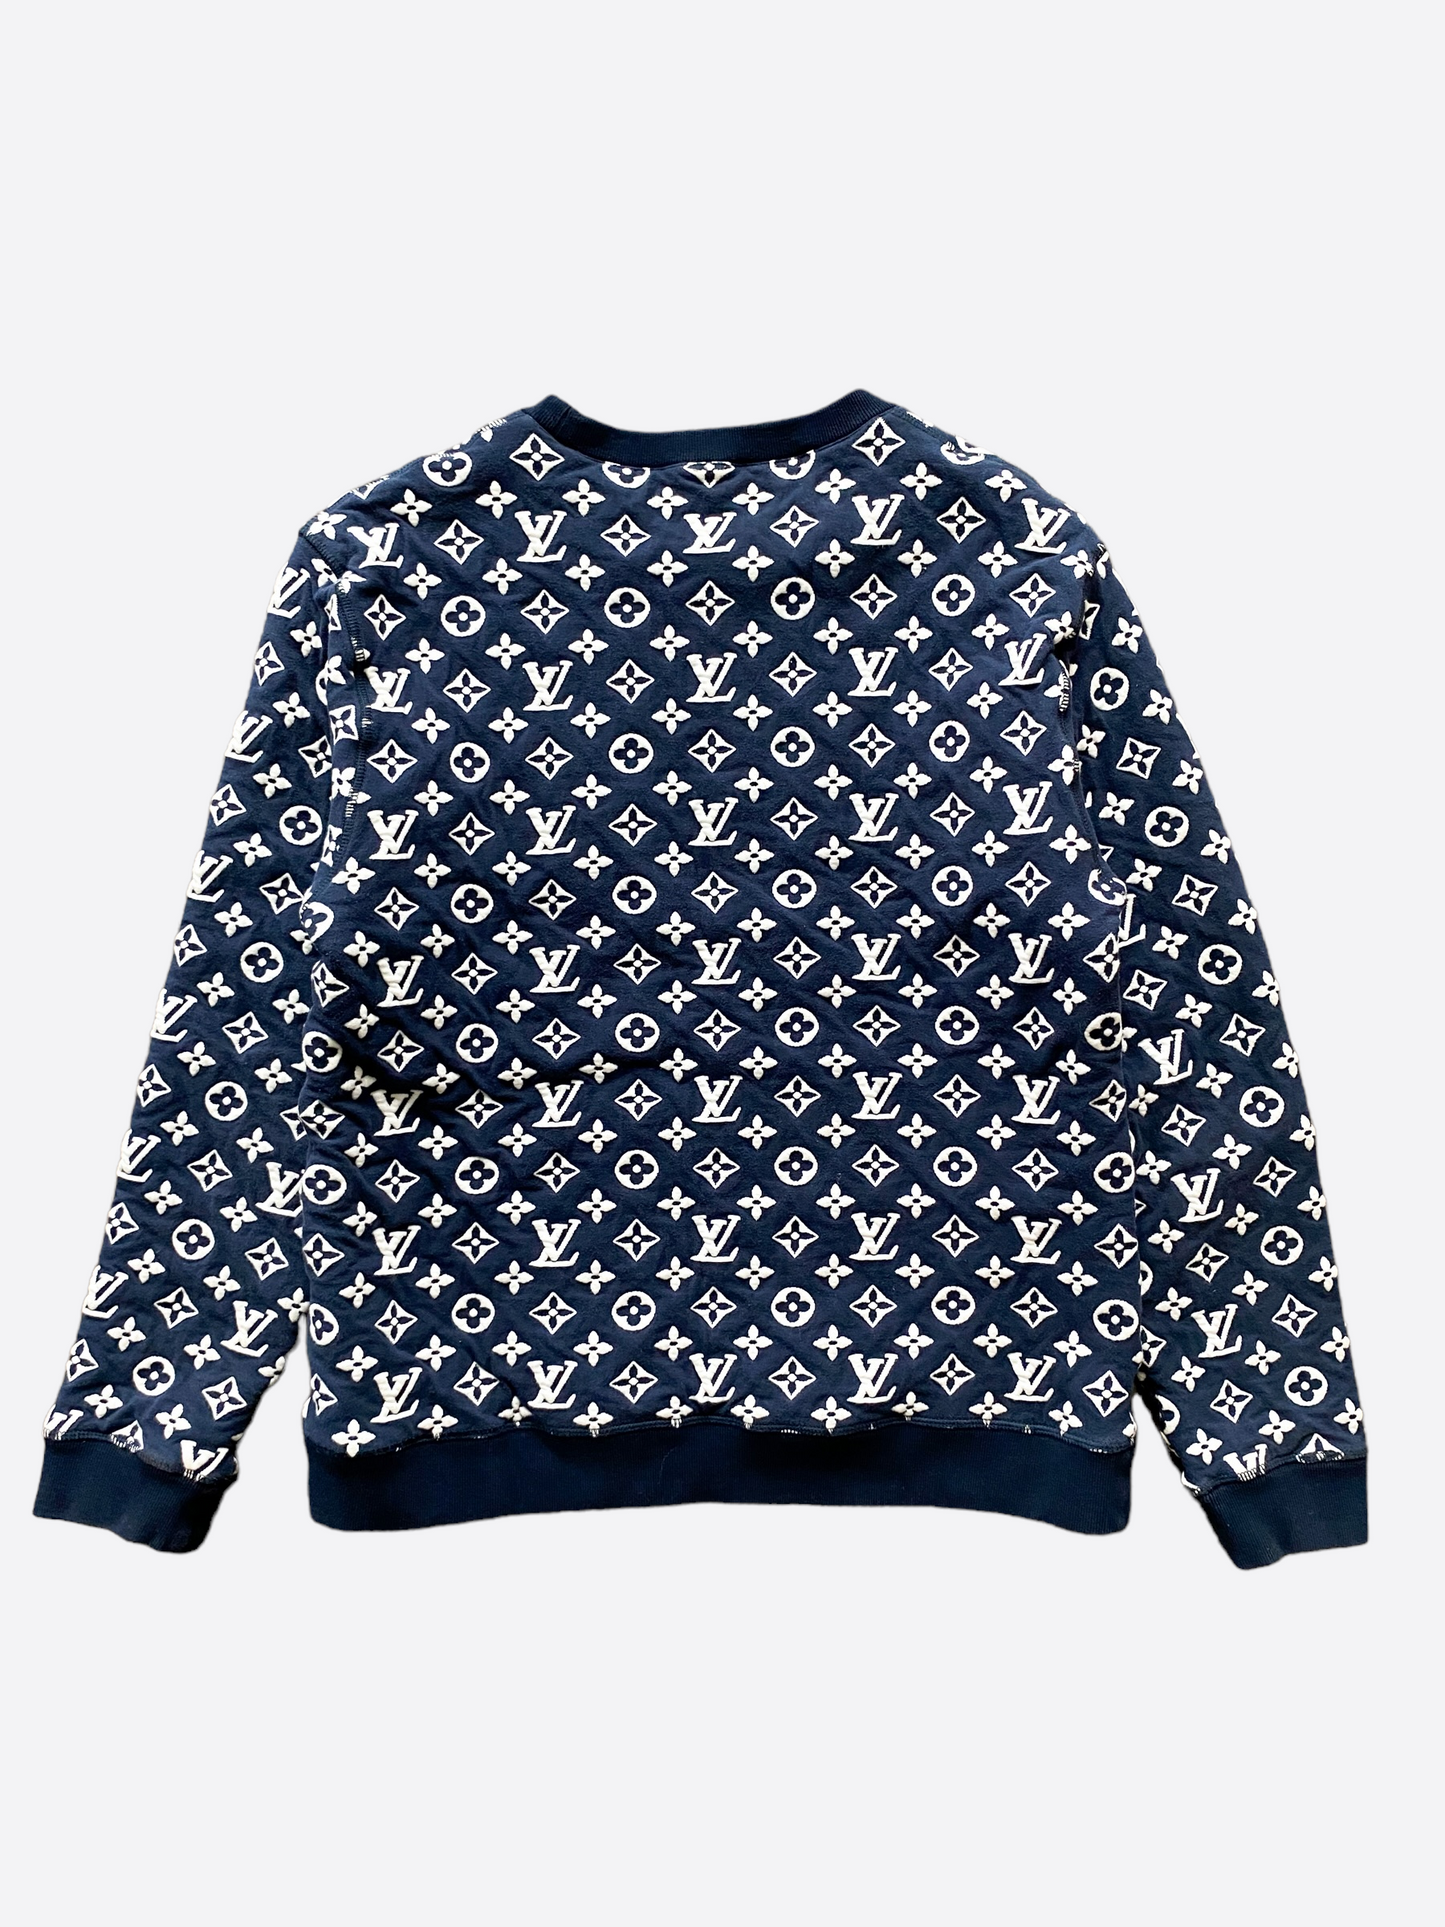 Louis Vuitton monogram print sweater now in our  shop- get to